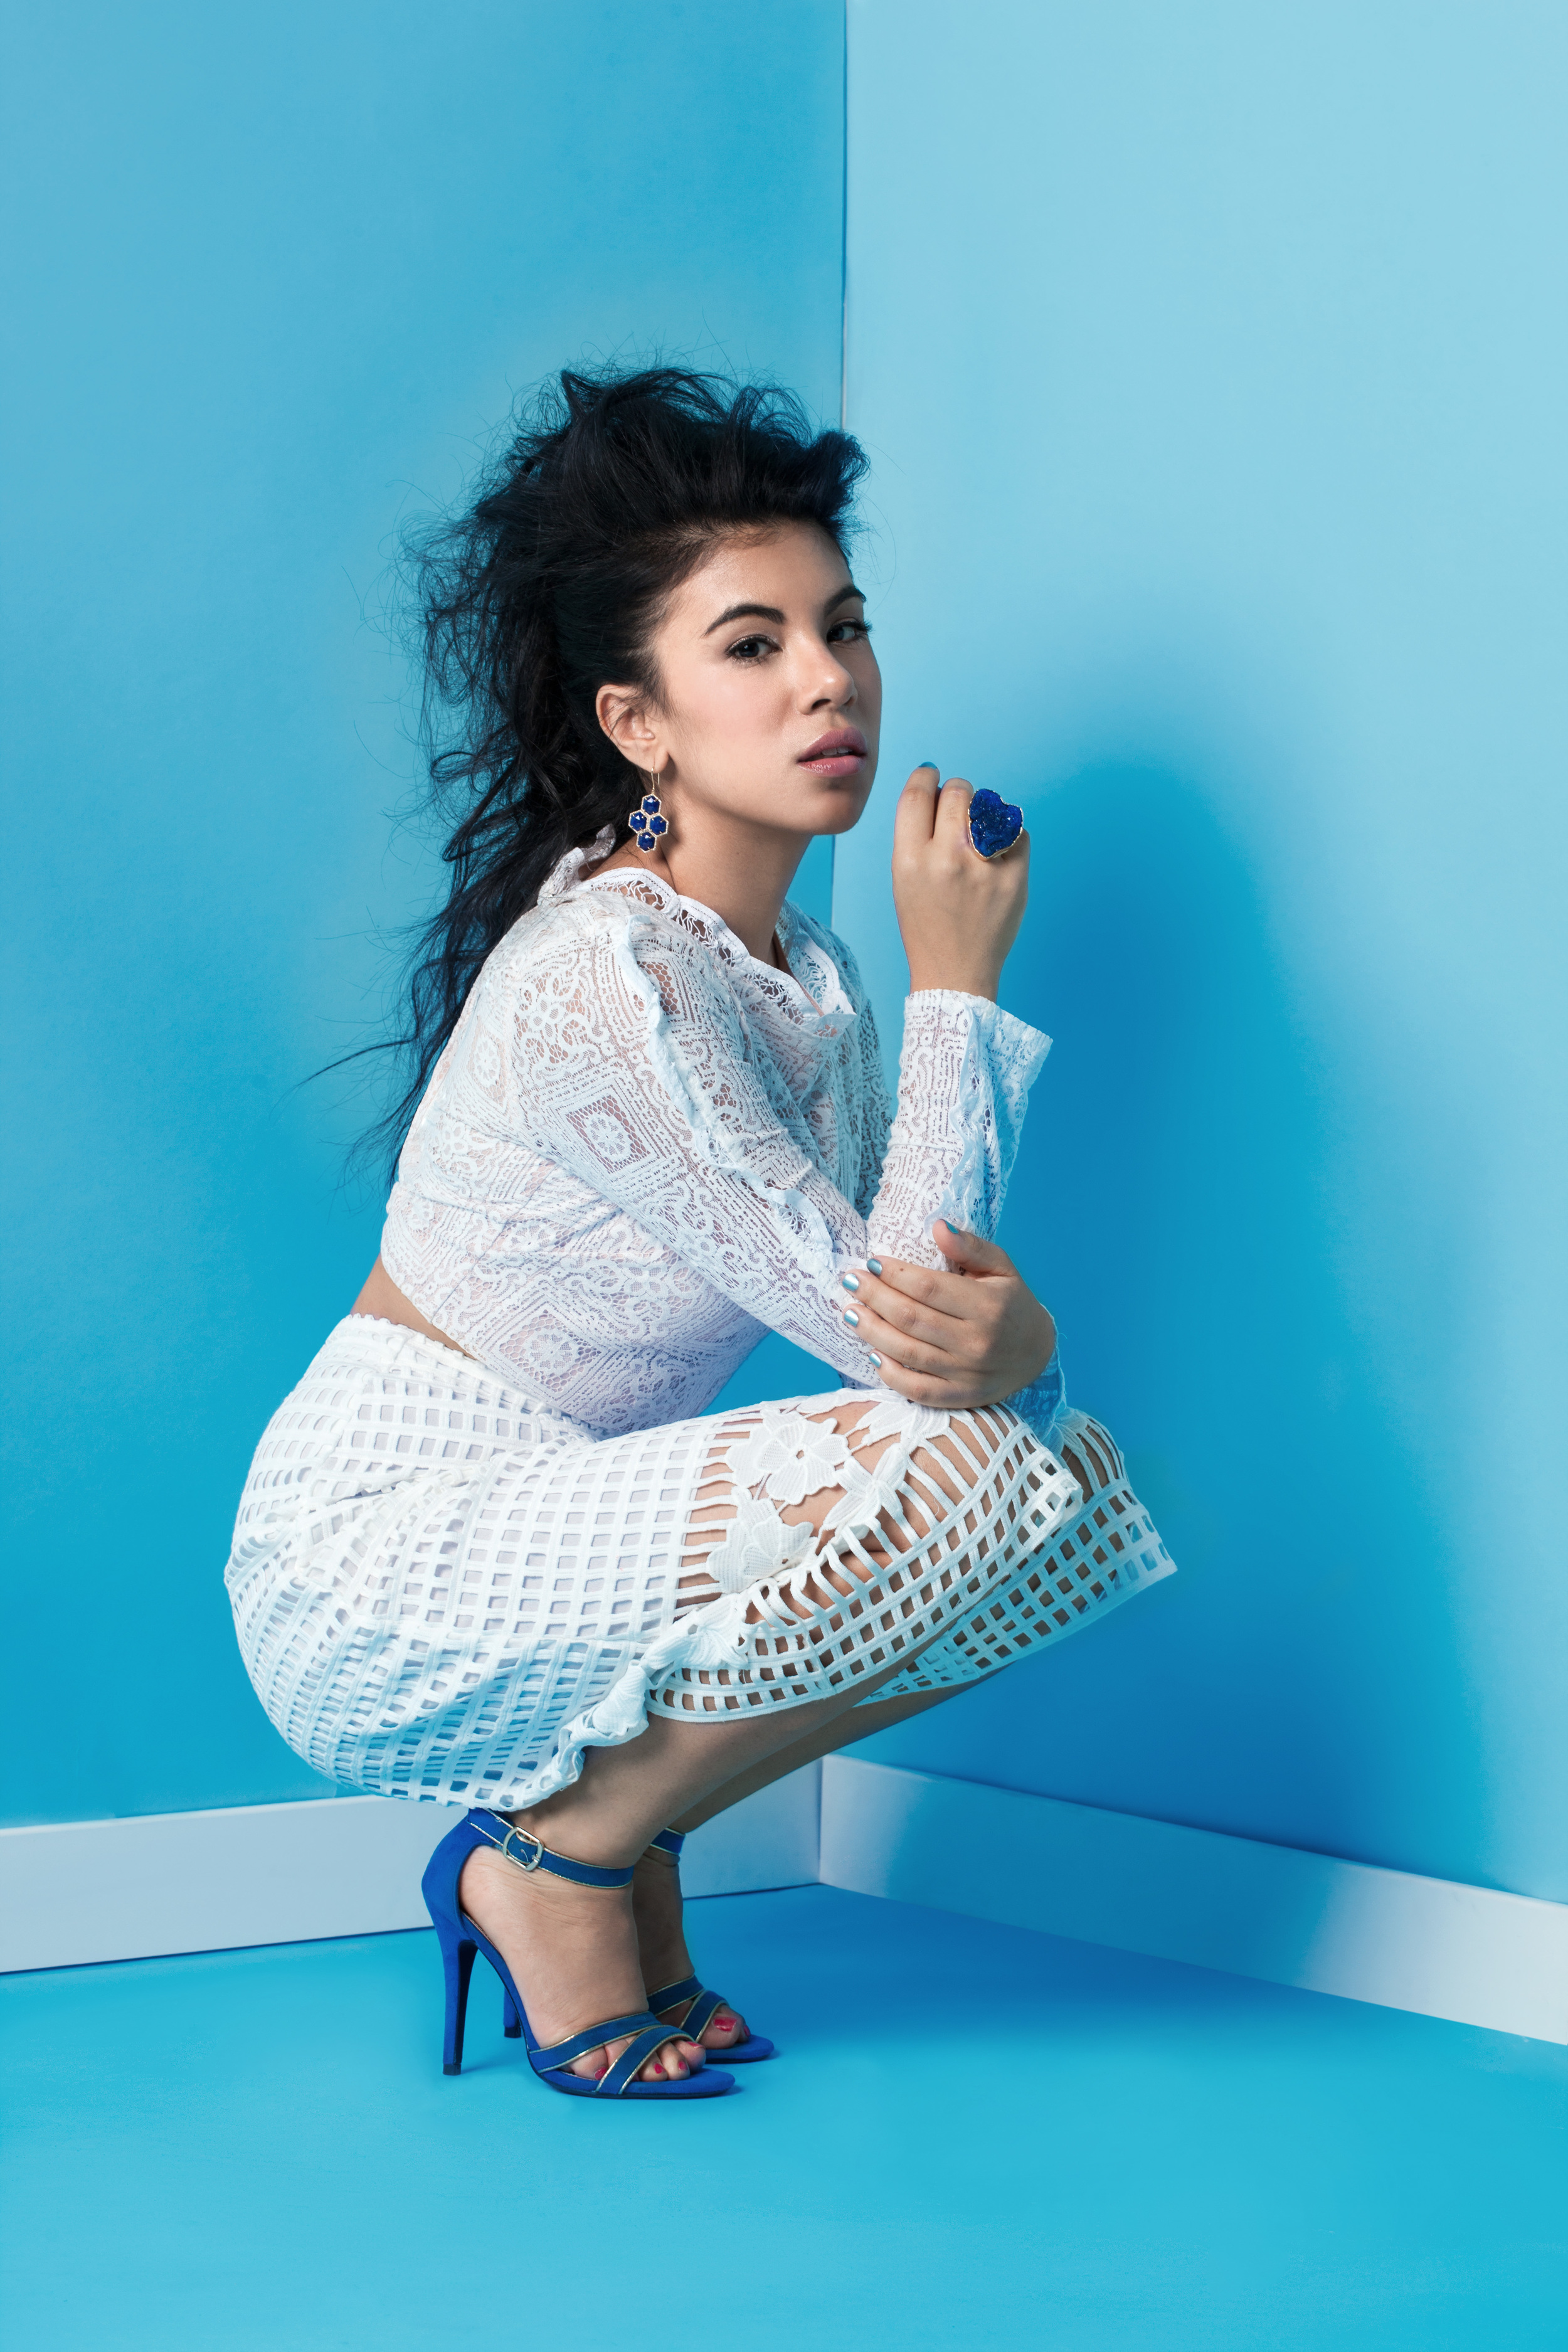 Chrissie Fit - Pitch Perfect 2